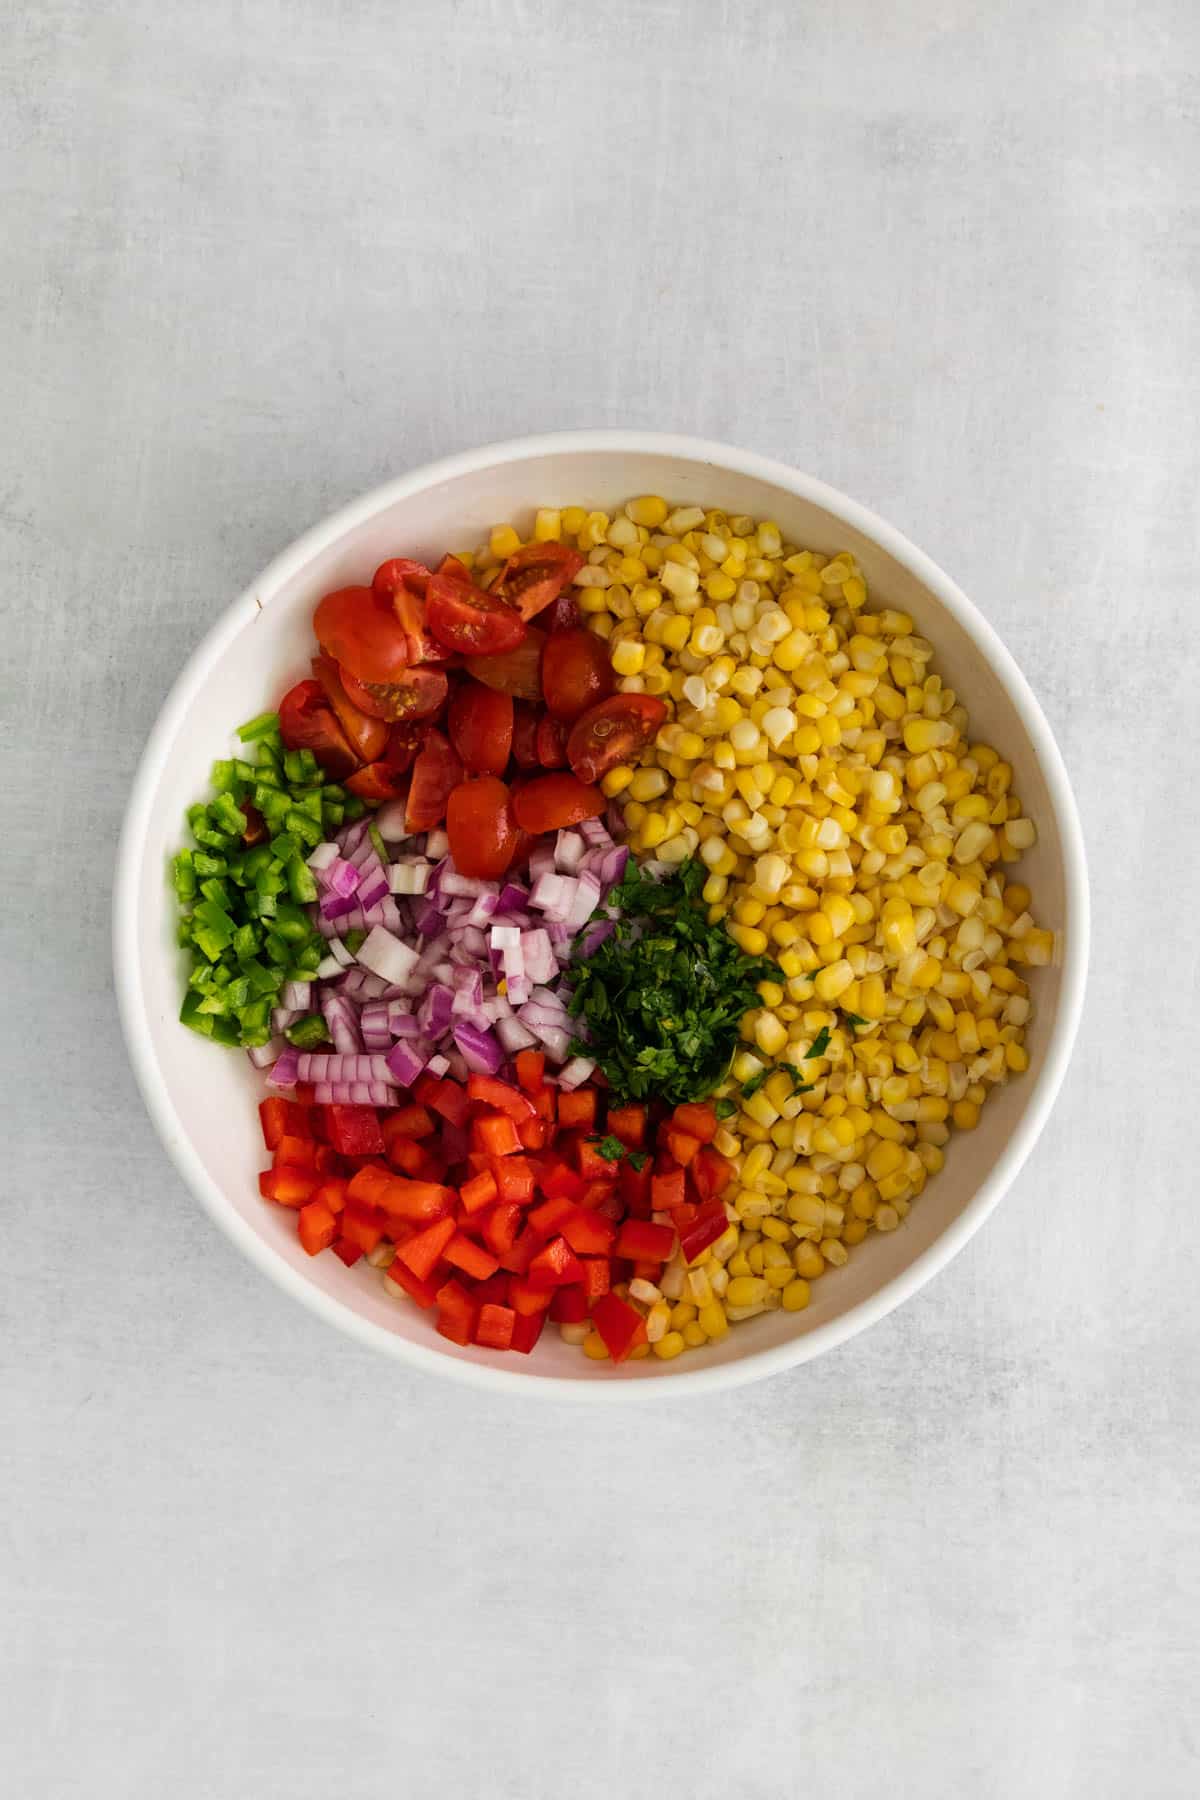 Corn kernels, tomatoes, onions, jalapeno, and other veggies in a large white bowl.